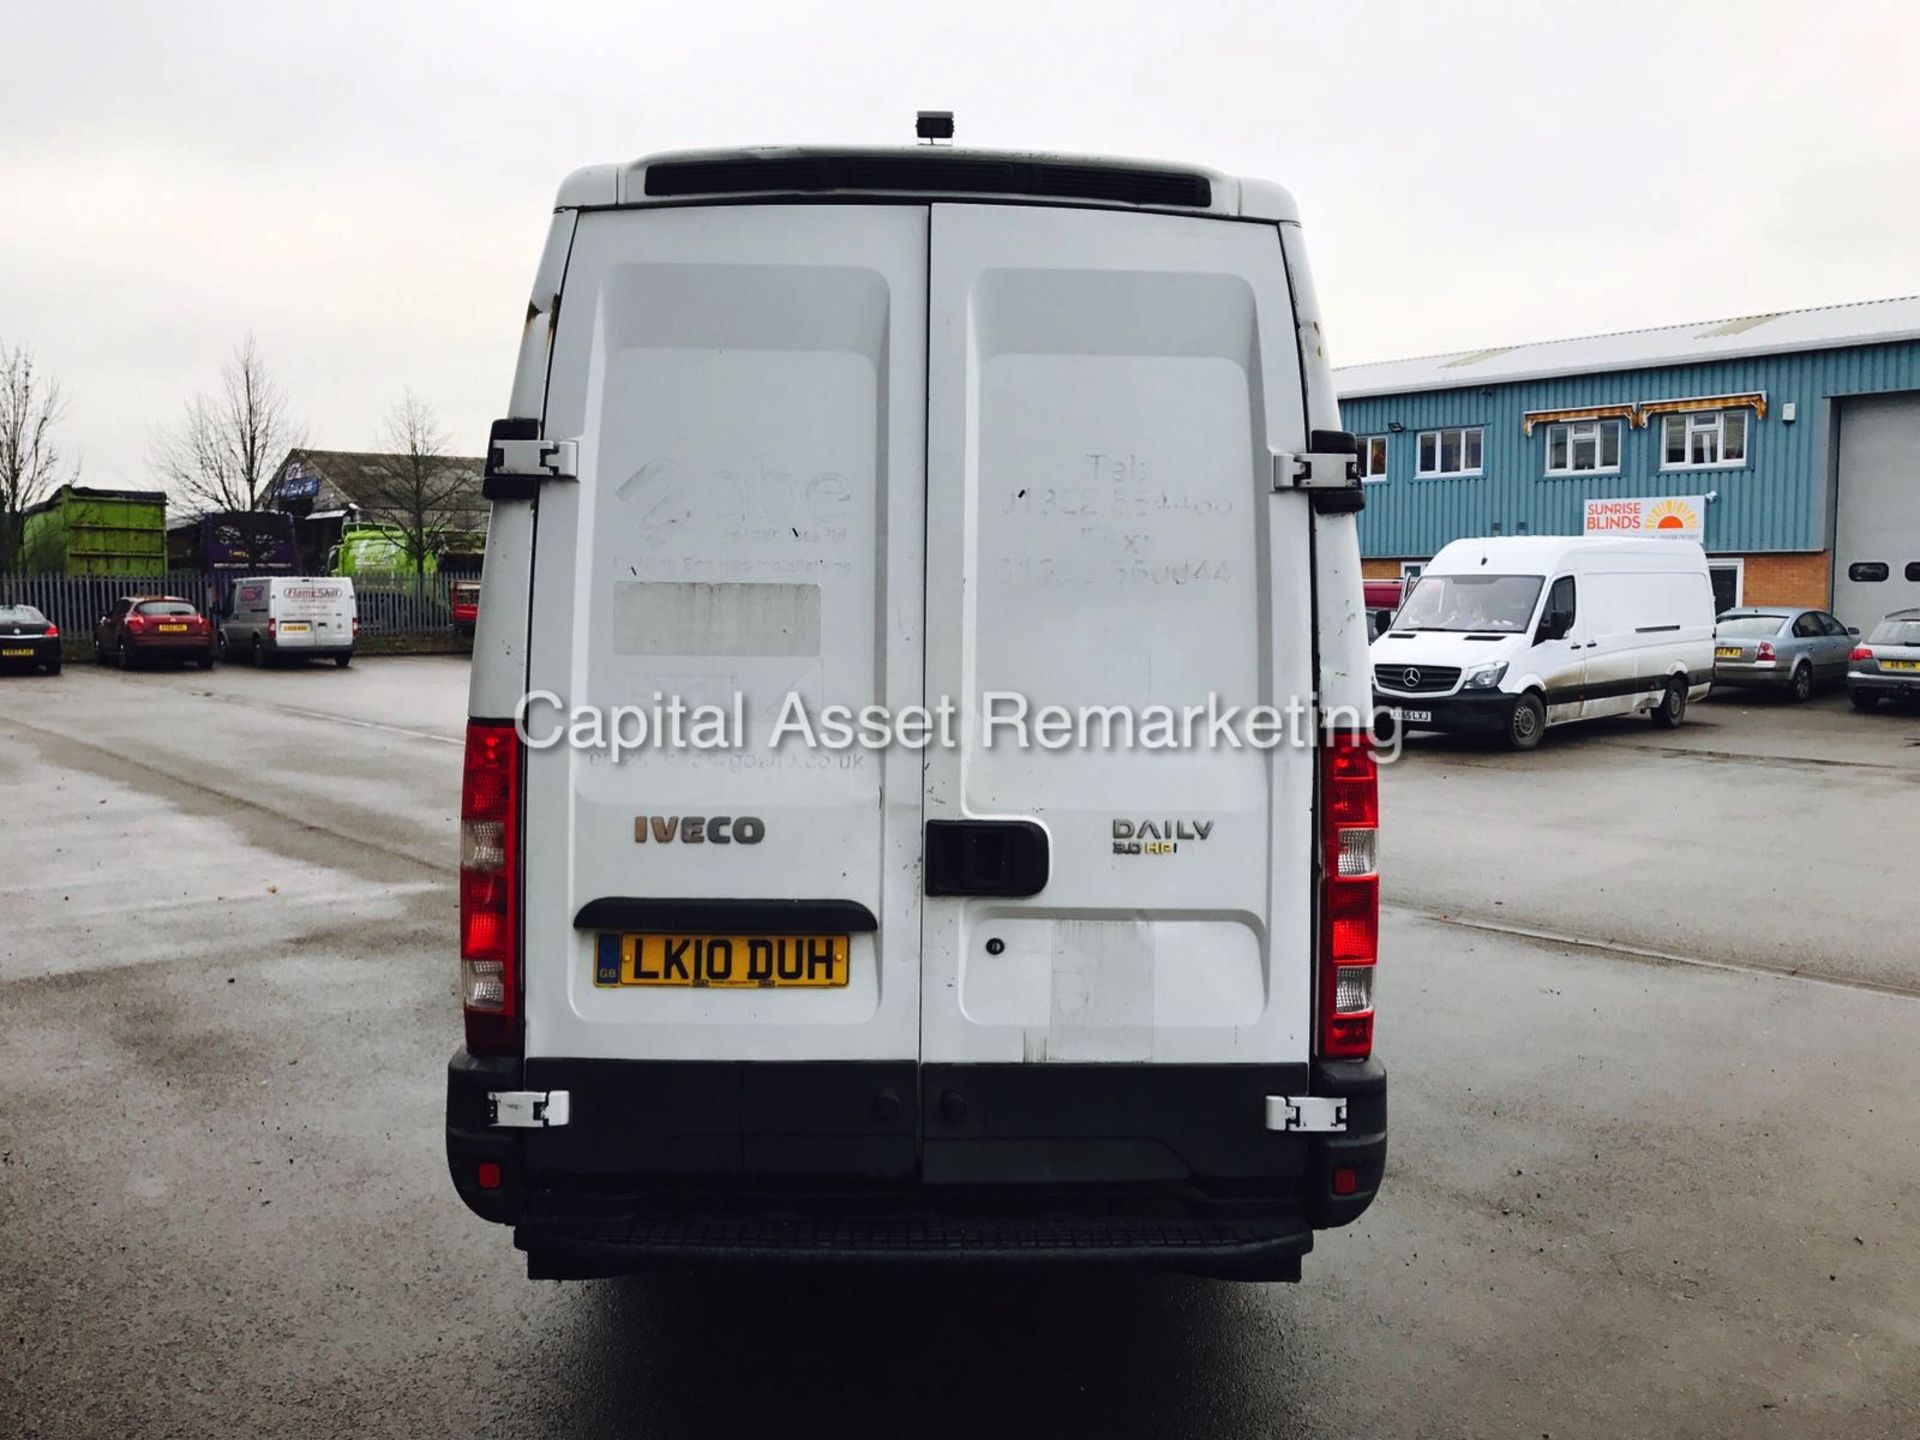 IVECO DAILY 3.0 TD (150 BHP) LONG WHEEL BASE - TWIN REAR WHEELER - (10 REG) LOW MILES - LOOK!!! - Image 6 of 15